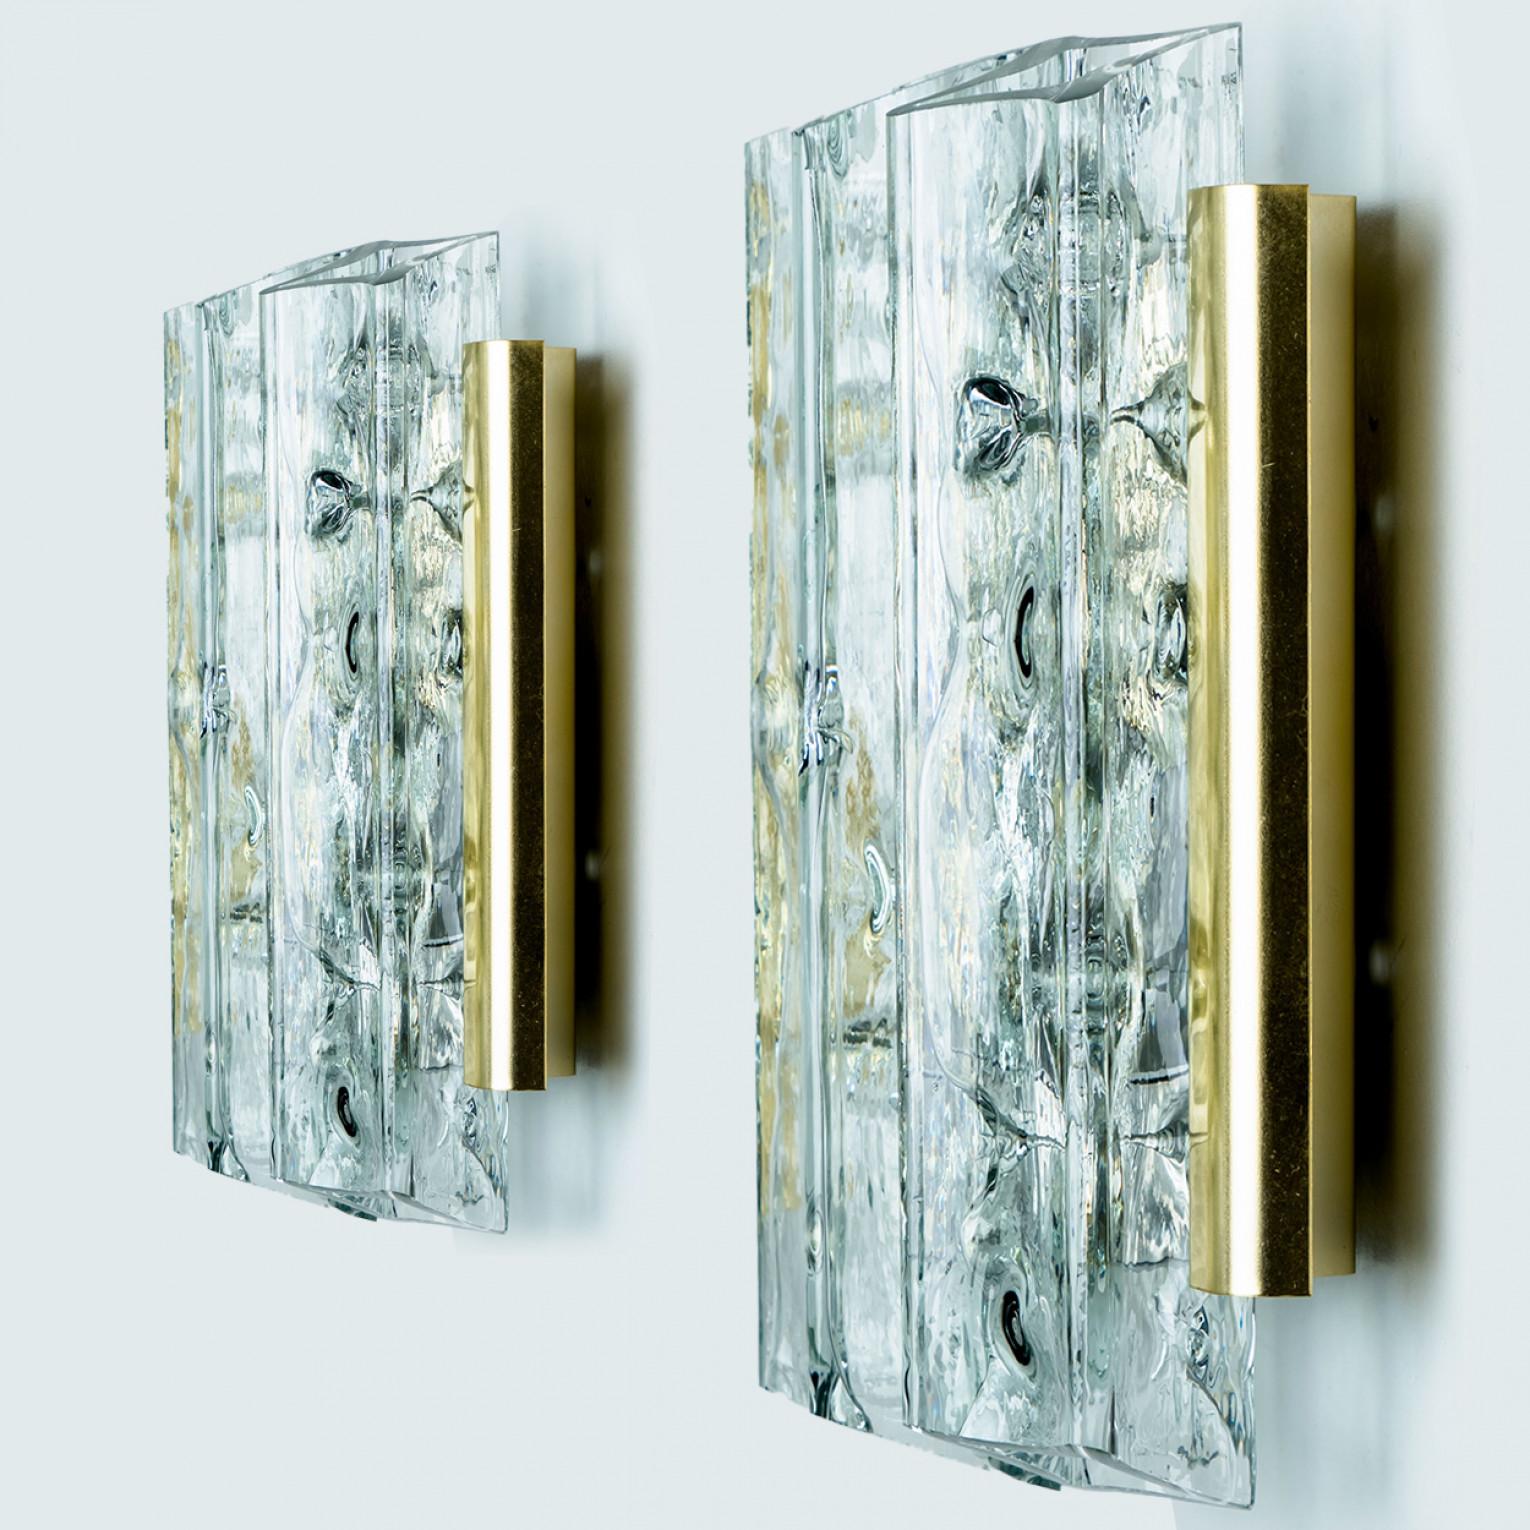 Mid-20th Century Pair of Faceted Tubes Wall Lights by Doria Leuchten, 1960s For Sale